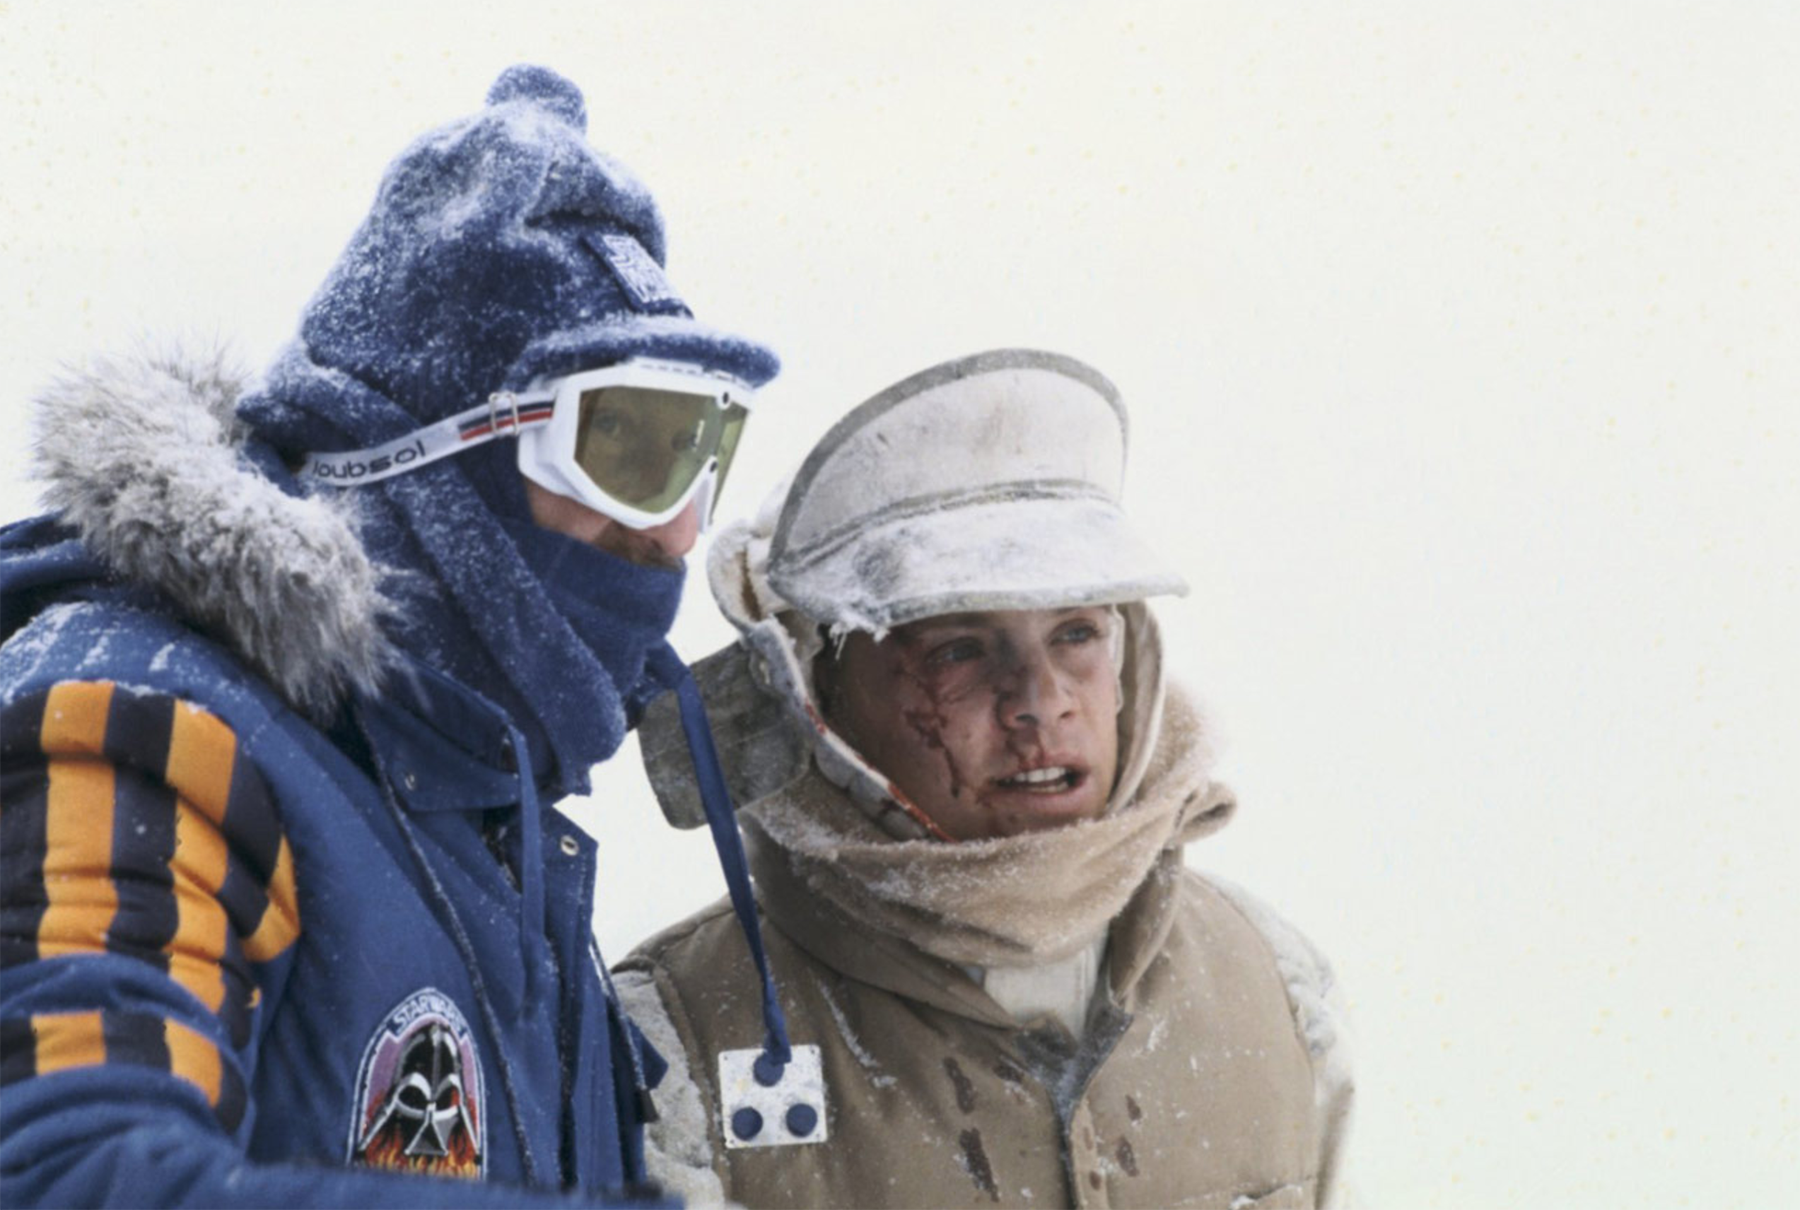 StarWars.com posted pictures of Carrie Fisher, Mark Hamill and Irvin Kershner (Director) all wearing the parka on location in Norway.